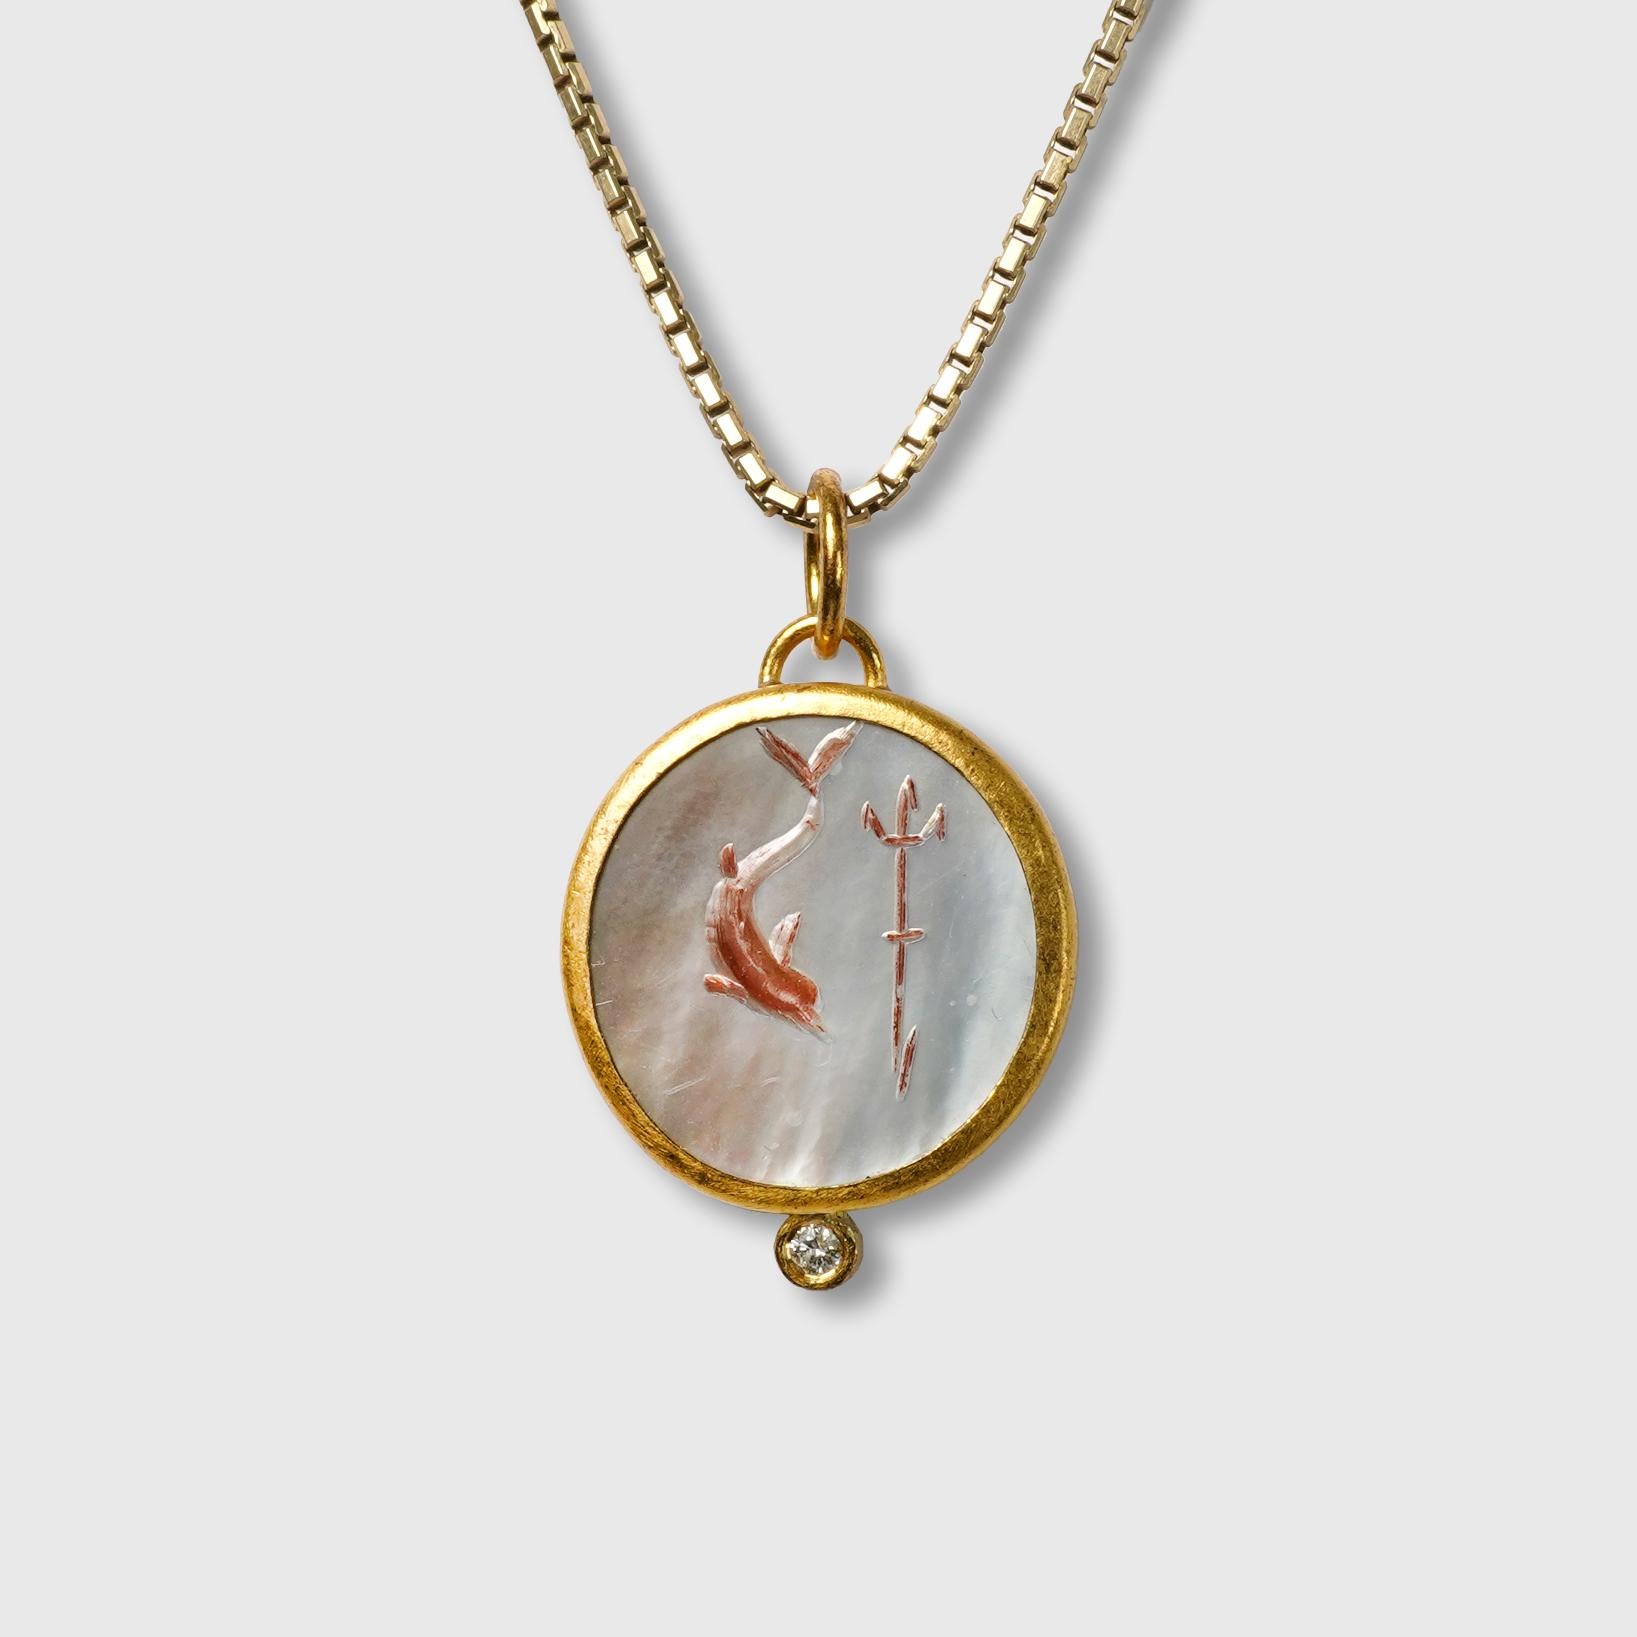 Poseidon, Arrow & Dolphin Intaglio Charm 24kt Gold, Carved 6.4ct Mother of Pearl For Sale 2